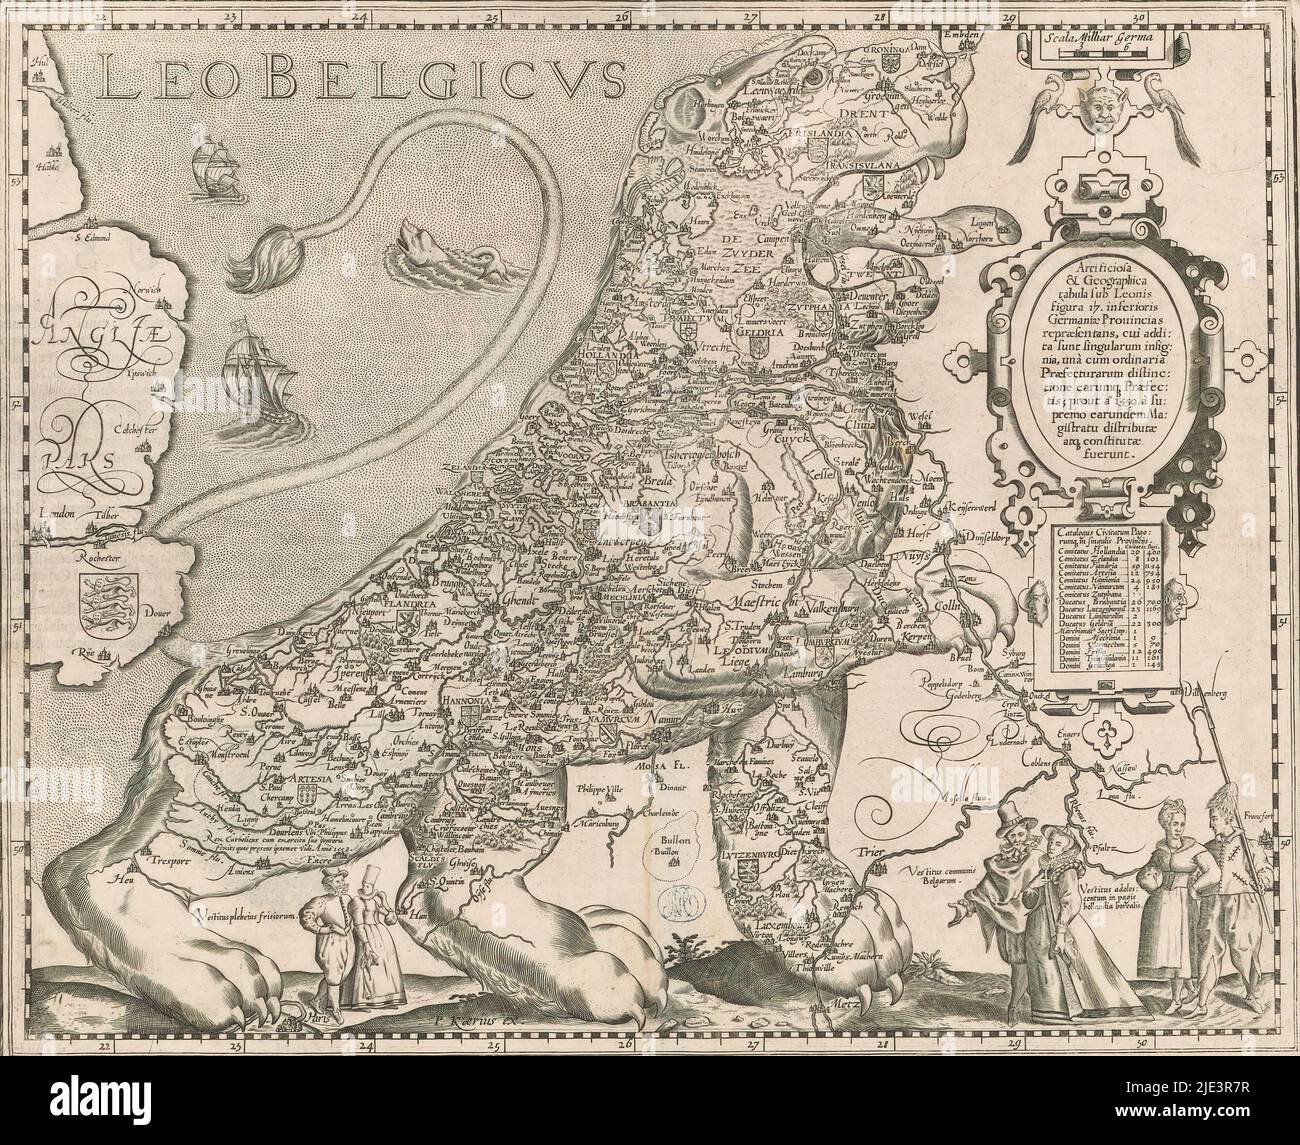 Map of the Seventeen Provinces in the Form of the Dutch Lion, Leo Belgicus (title on object), Map of the Seventeen Provinces in the Form of the Dutch Lion. On the map itself, each province has its corresponding coat of arms. To the right a cartouche with a scale bar at the top: Scala milliar Germa, in the middle an explanation of the map and at the bottom an overview with topographical information about each province. At the bottom of the map three couples are depicted in clothing from different areas and of different standing. Graduations along the edges. On verso Latin text., print maker Stock Photo